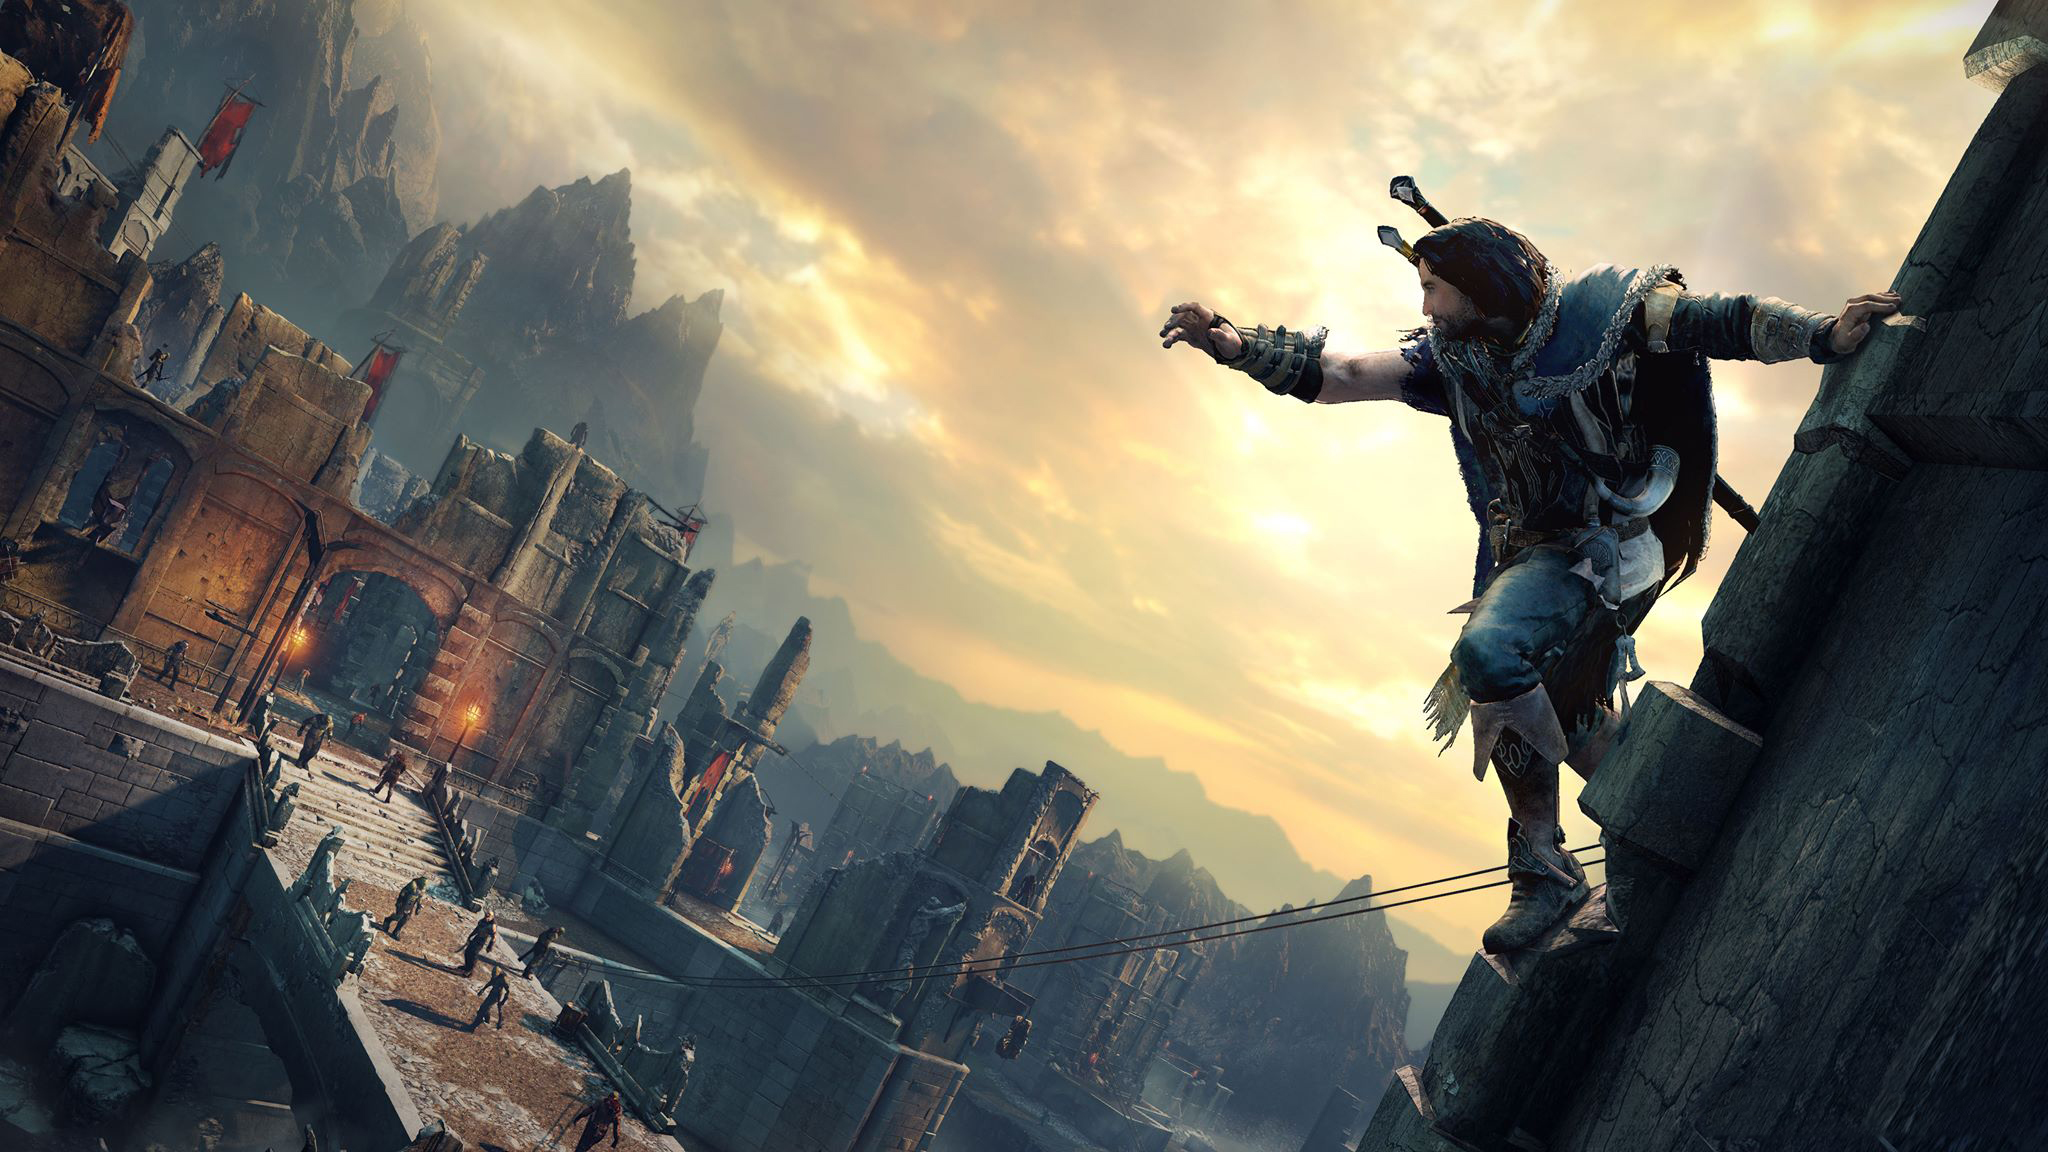 shadow of mordor wallpaper,action adventure game,pc game,shooter game,strategy video game,games